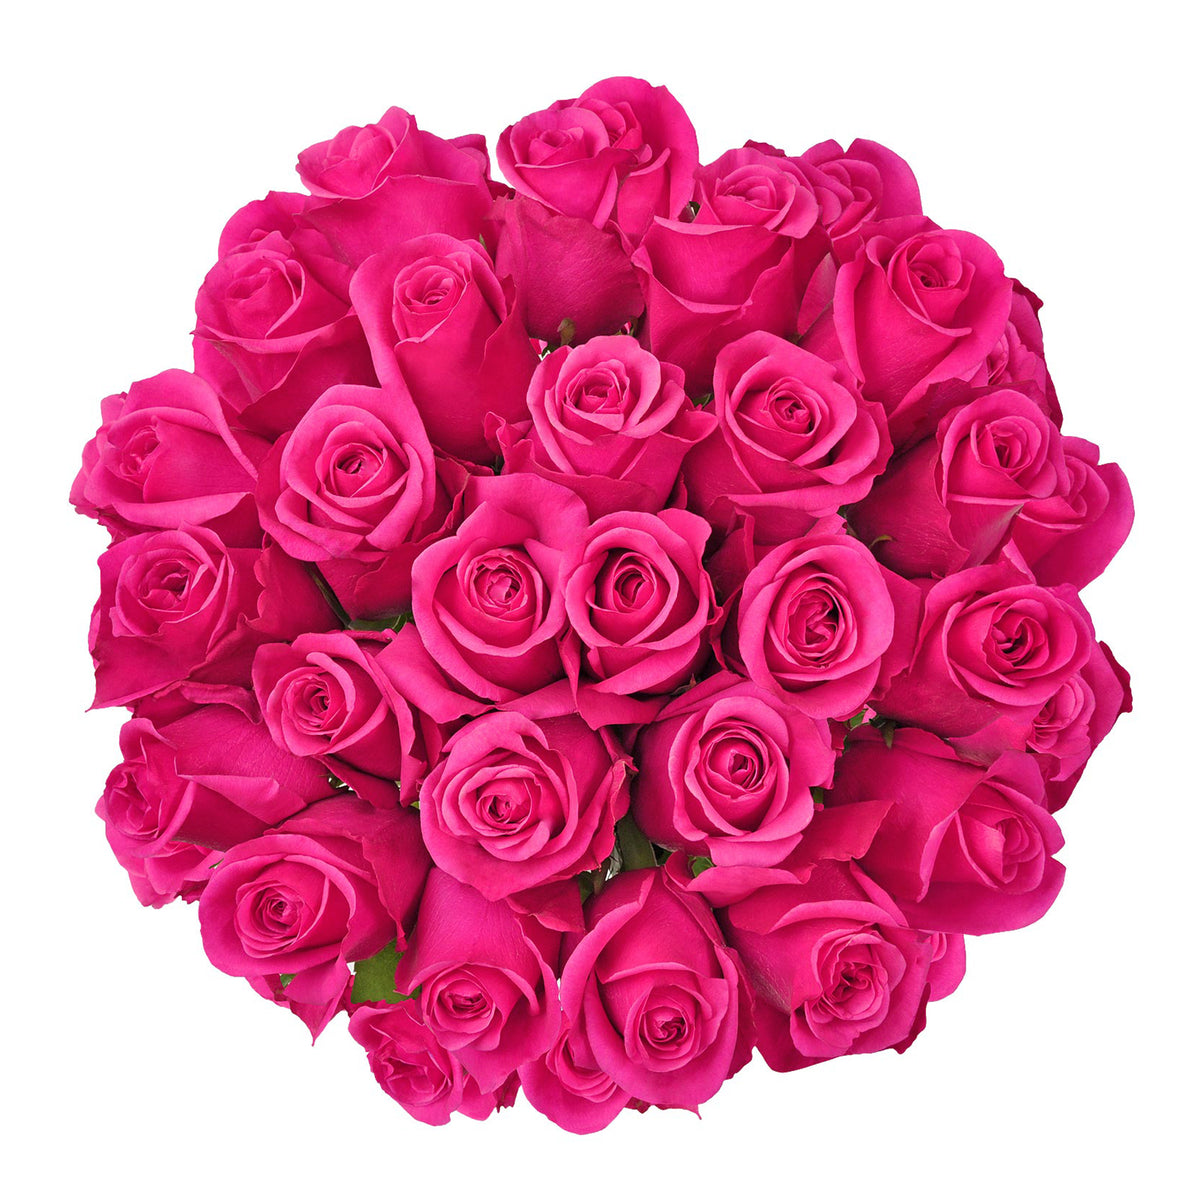 50 Stems of Birthday Roses 25 Red & 25 One Color